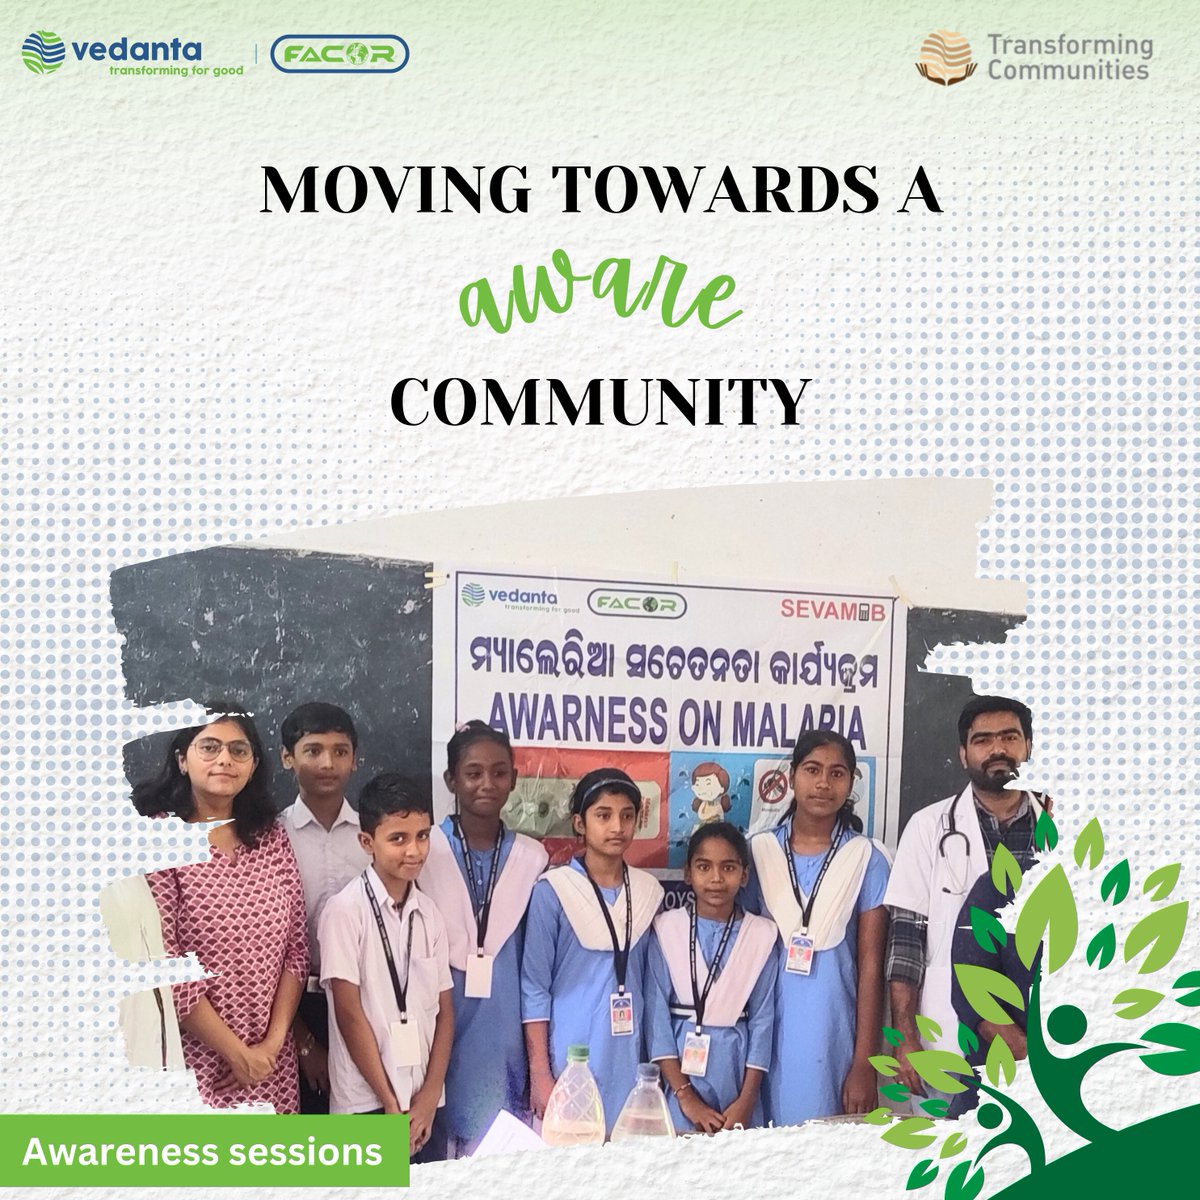 #FACOR stands strong with its aim of Transforming Communities, dedicated to #SupportingOurCommunity in their journey toward #improvedhealth and environmental sustainability. #WorldMalariaDay2024 #transformingforgood #vedanta #transformingcommunities #facorcares #communityfirst